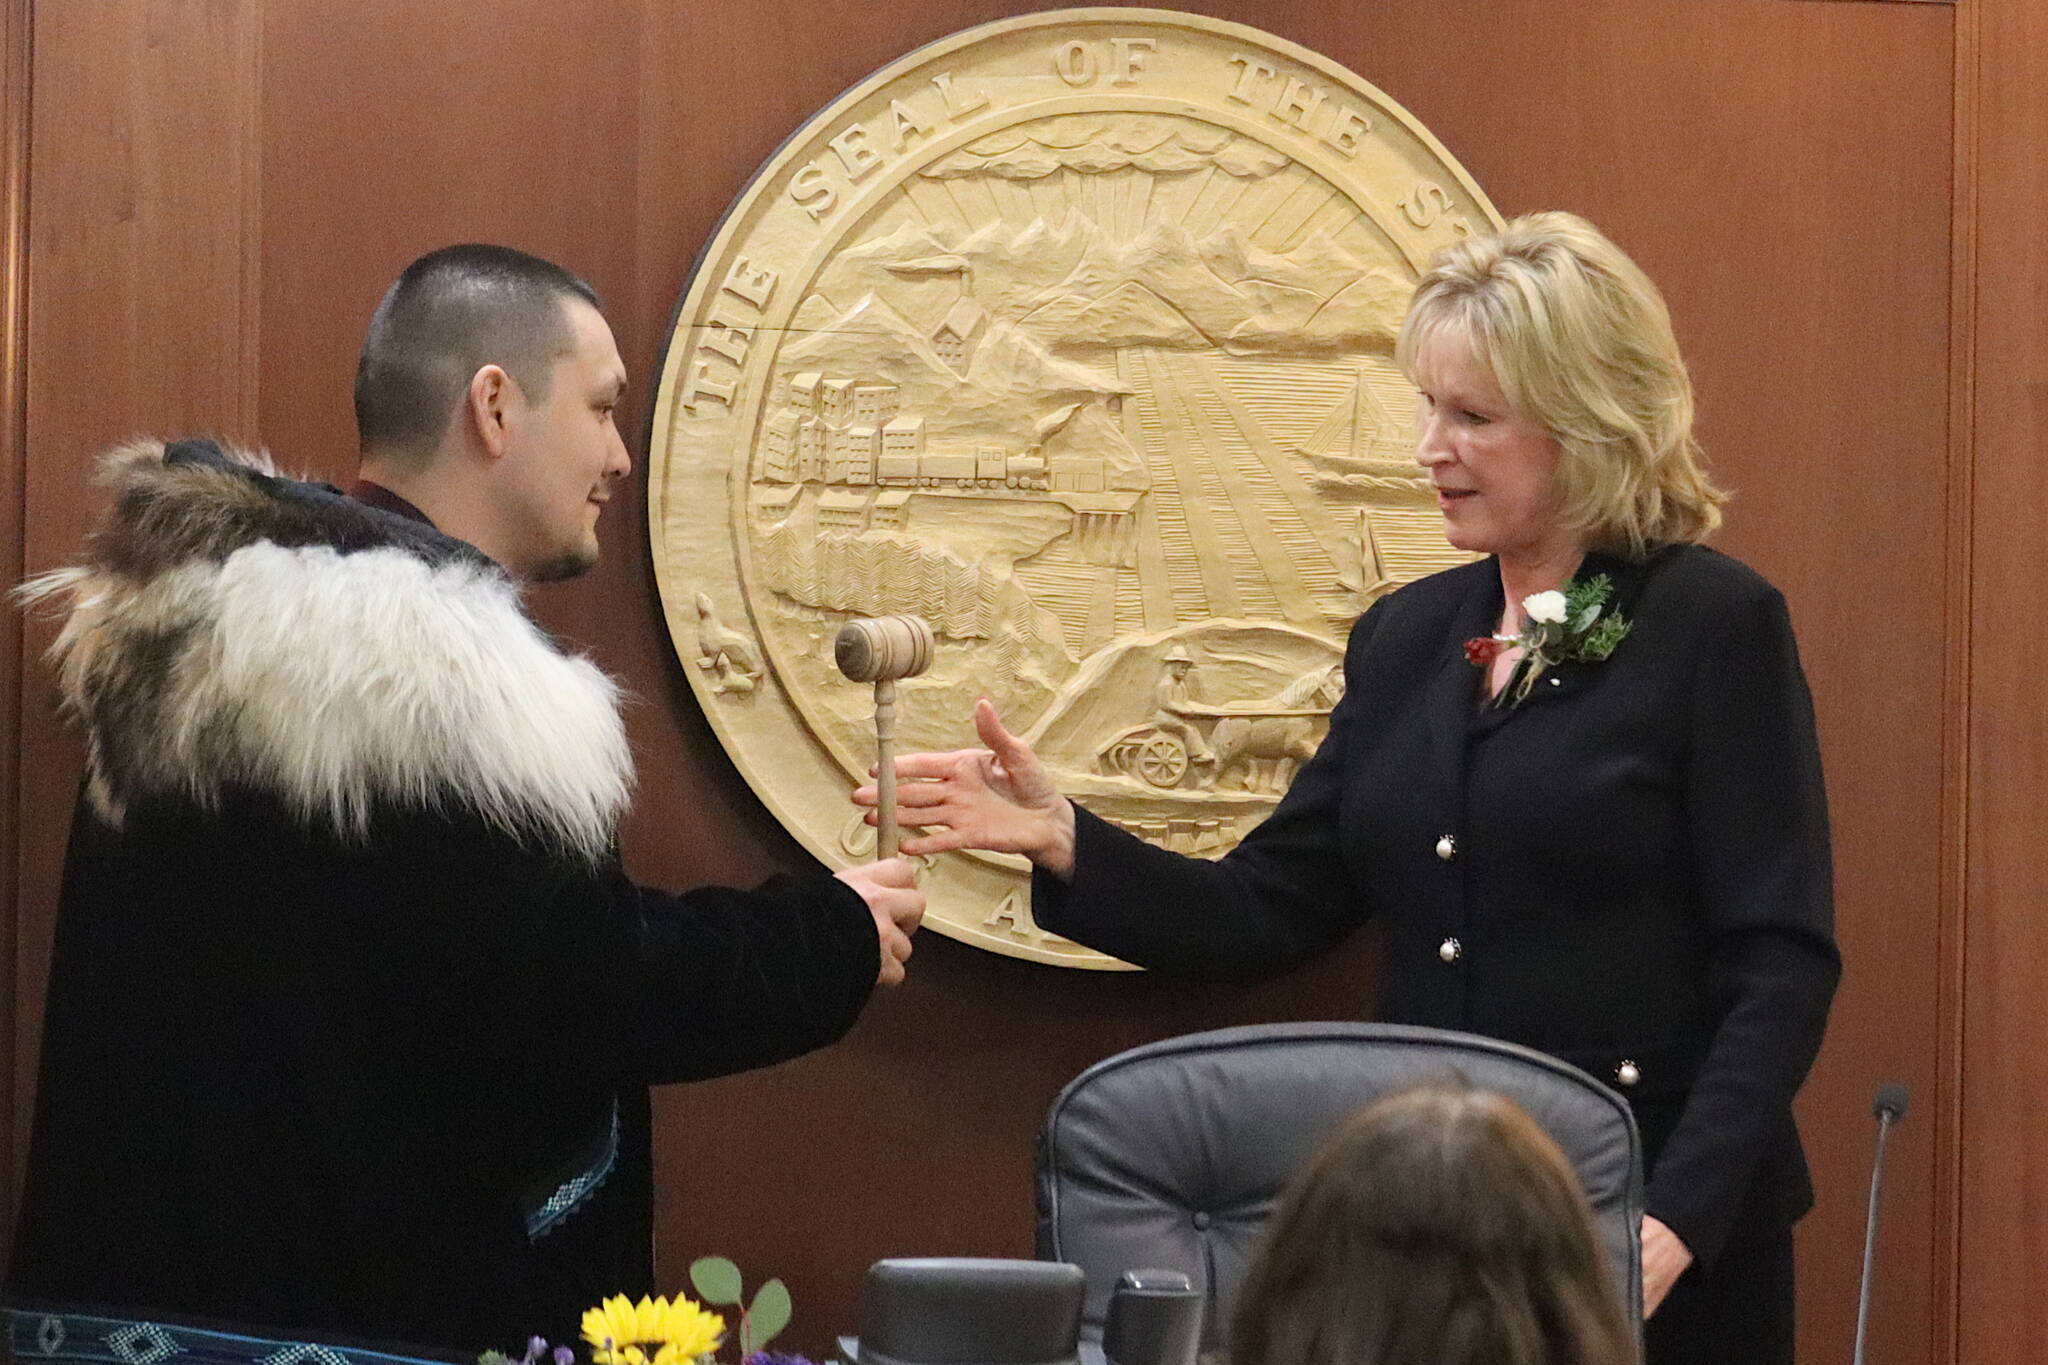 State Rep. Josiah Patkotak, left, an Utqiagvik independent, accepts the gavel from Lt. Gov. Nancy Dahlstrom after he’s elected speaker pro tem of the House during the opening day of the 33rd Alaska State Legislature on Tuesday. Patkotak, who has served as president pro tem during a previous stalemate in determining a House majority, is among the members Republicans are trying to lure to join a coalition controlled by their party. (Mark Sabbatini / Juneau Empire)